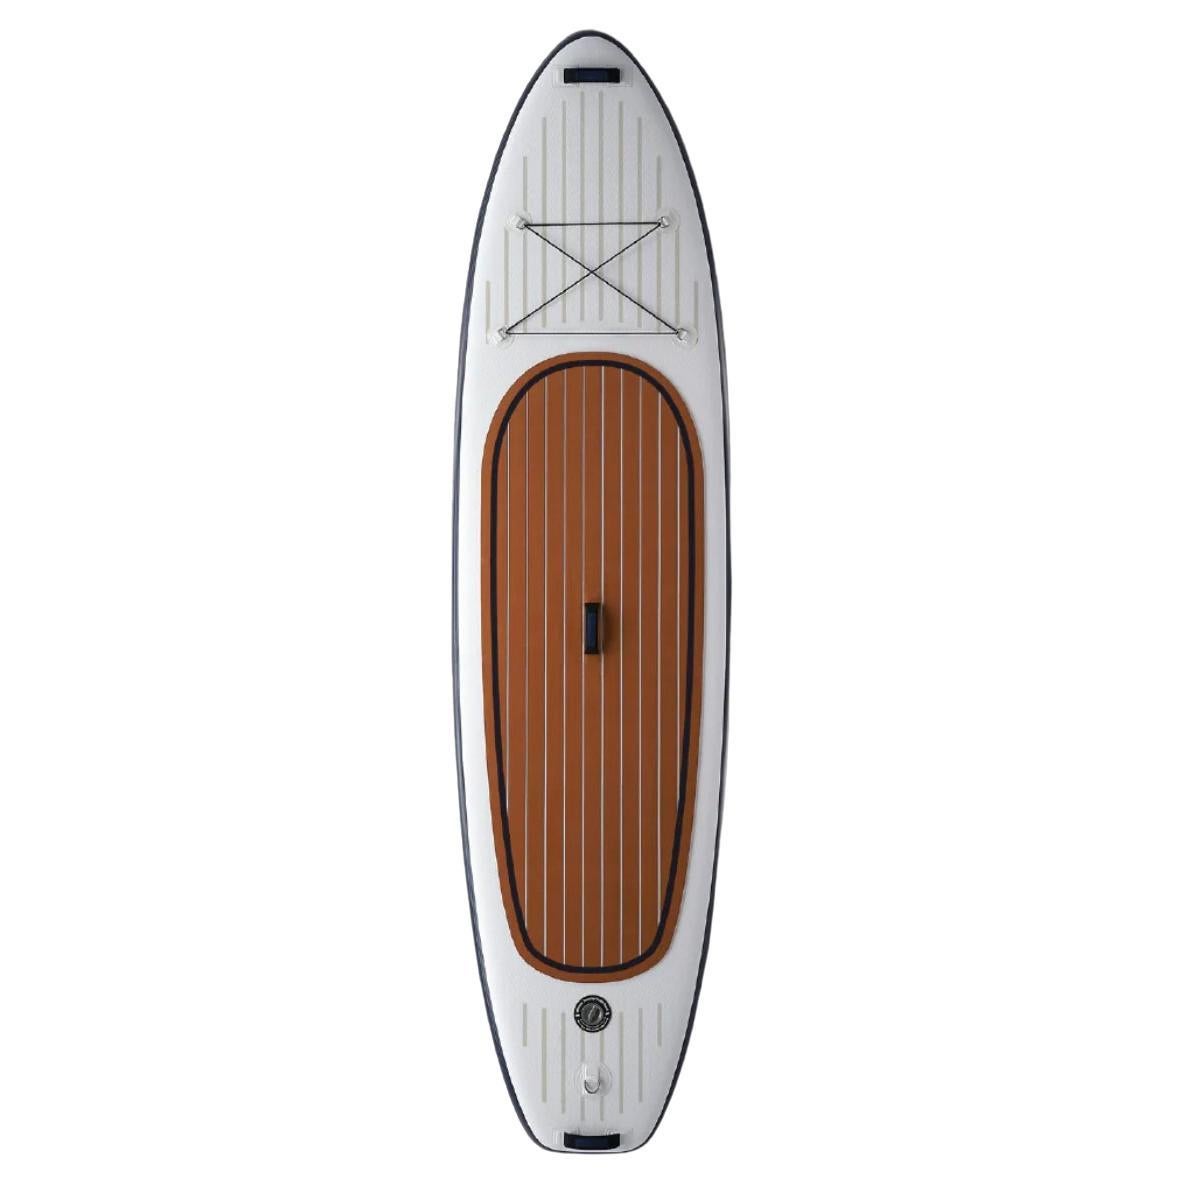 The Newport Inflatable Stand-Up Paddle Board (ISUP) by Beau Lake 